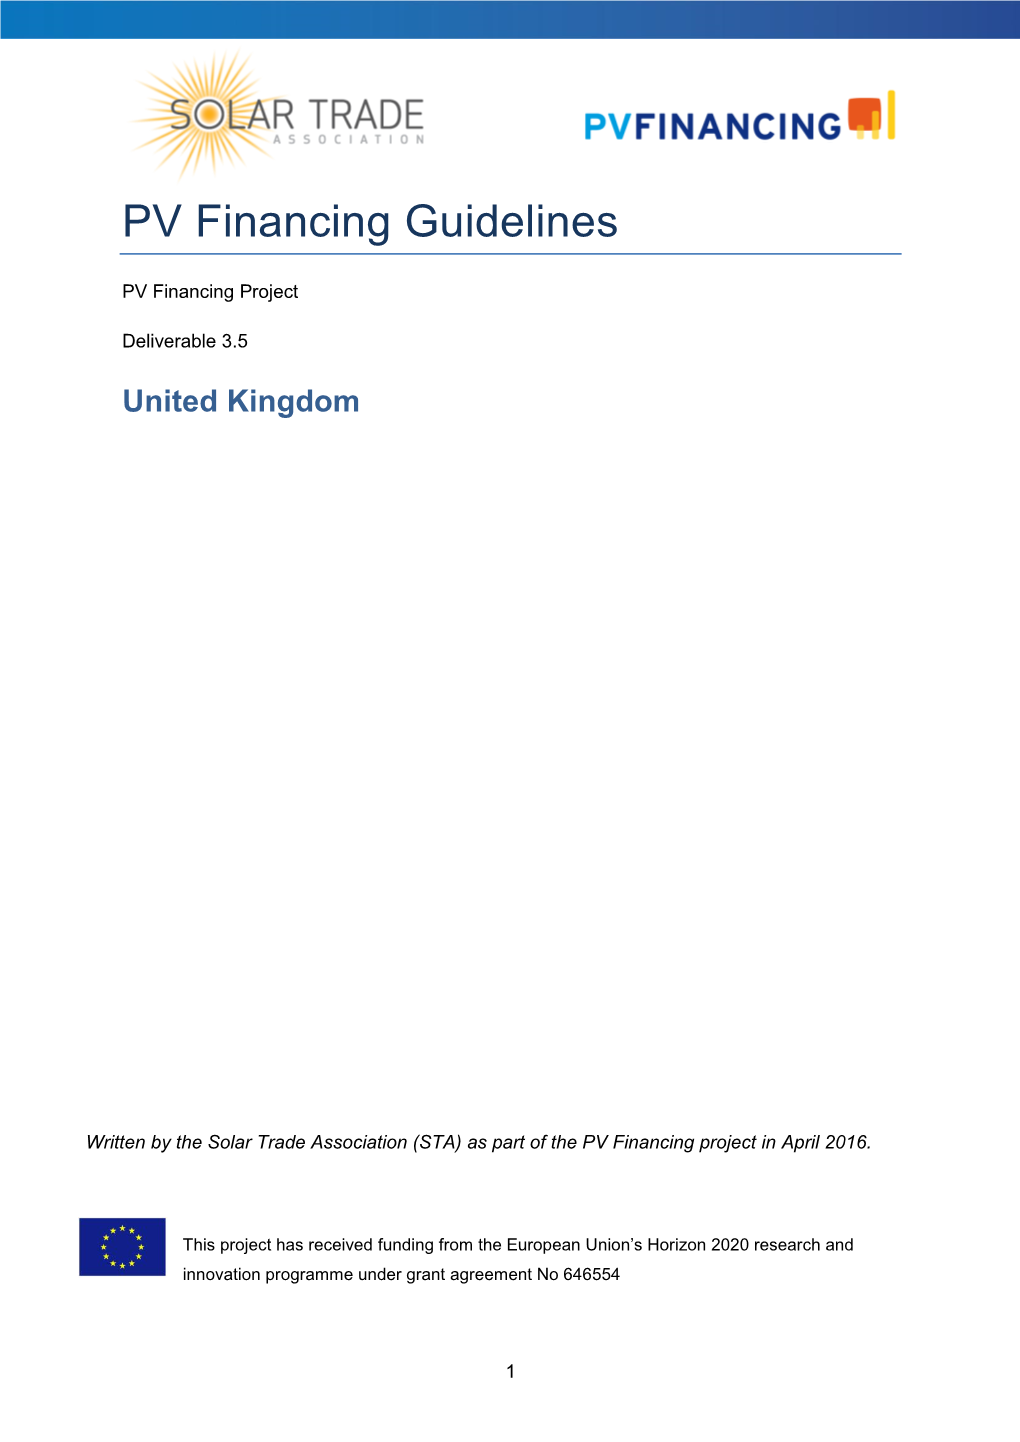 PV Financing Guidelines